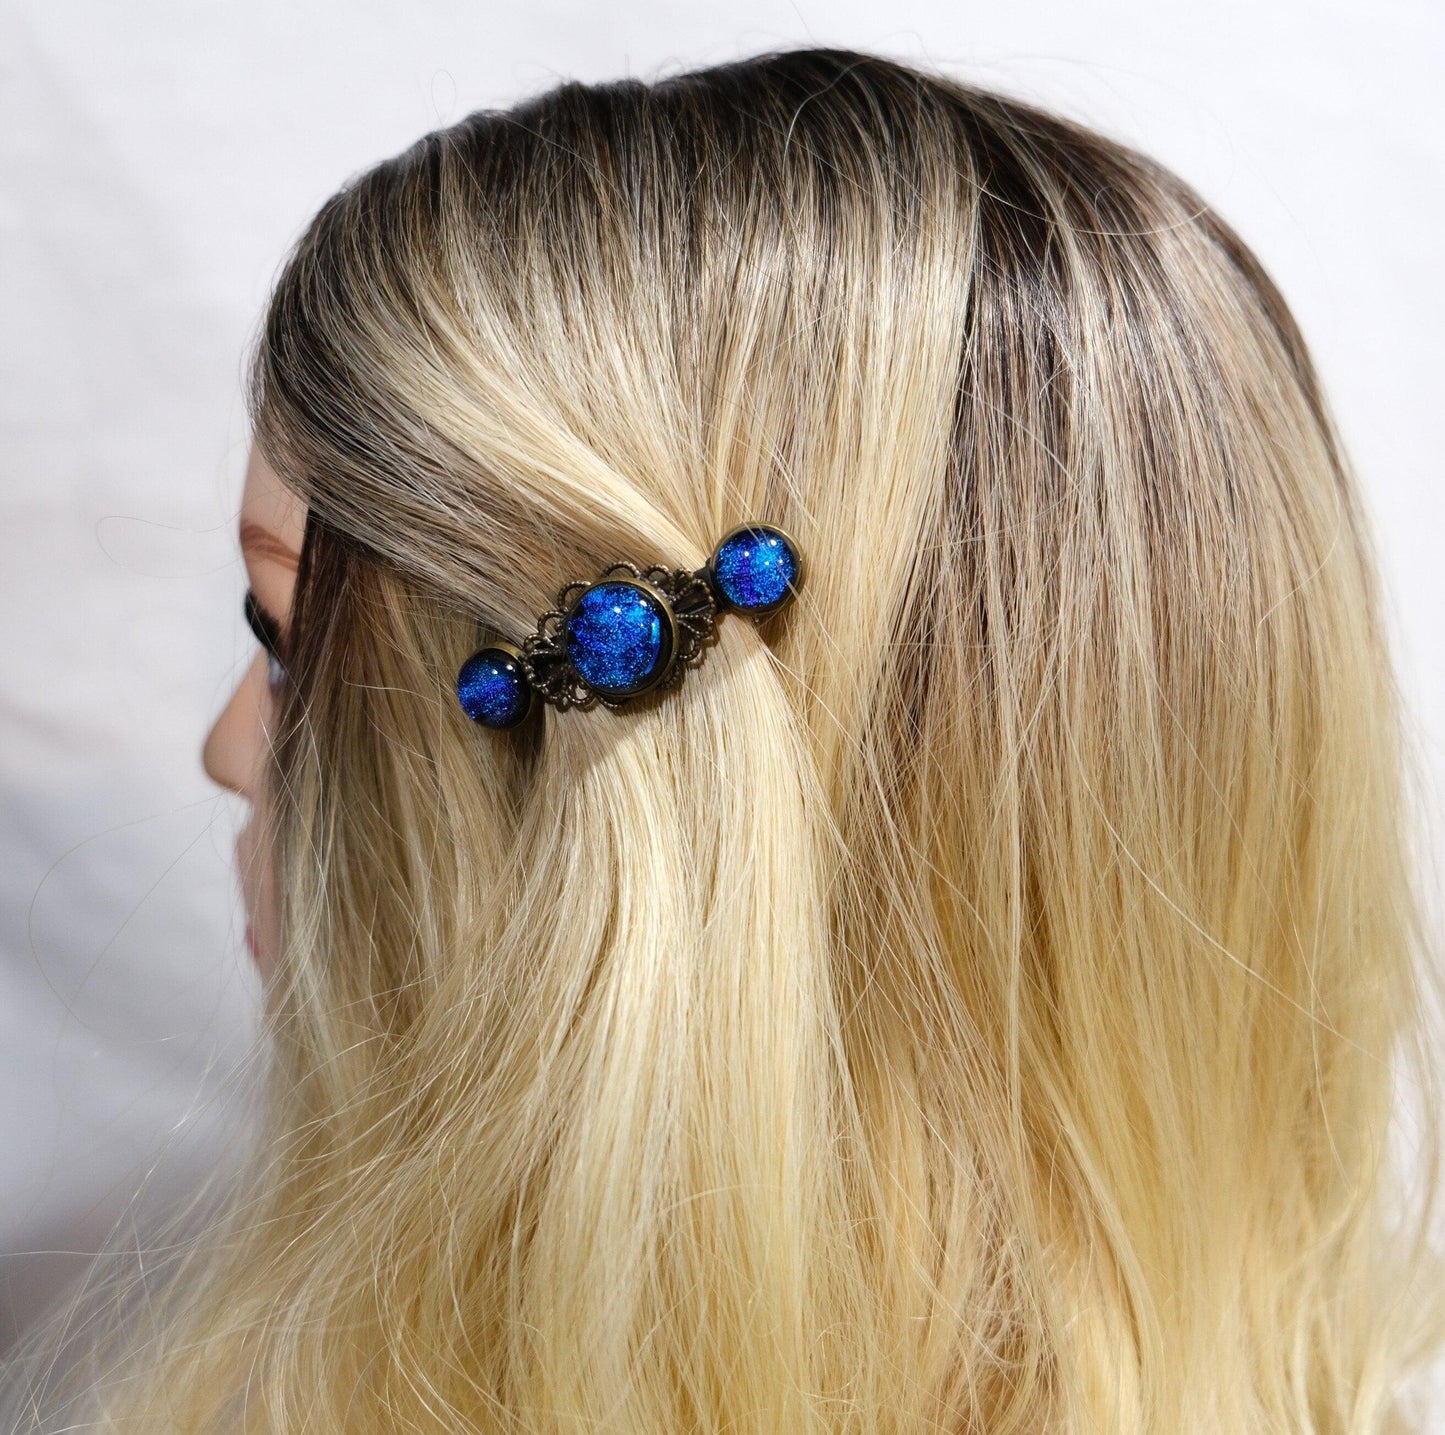 Barrette pair, bronze flowers with blue dichroic fused glass cabochons, french clip, 2 1/4 inches